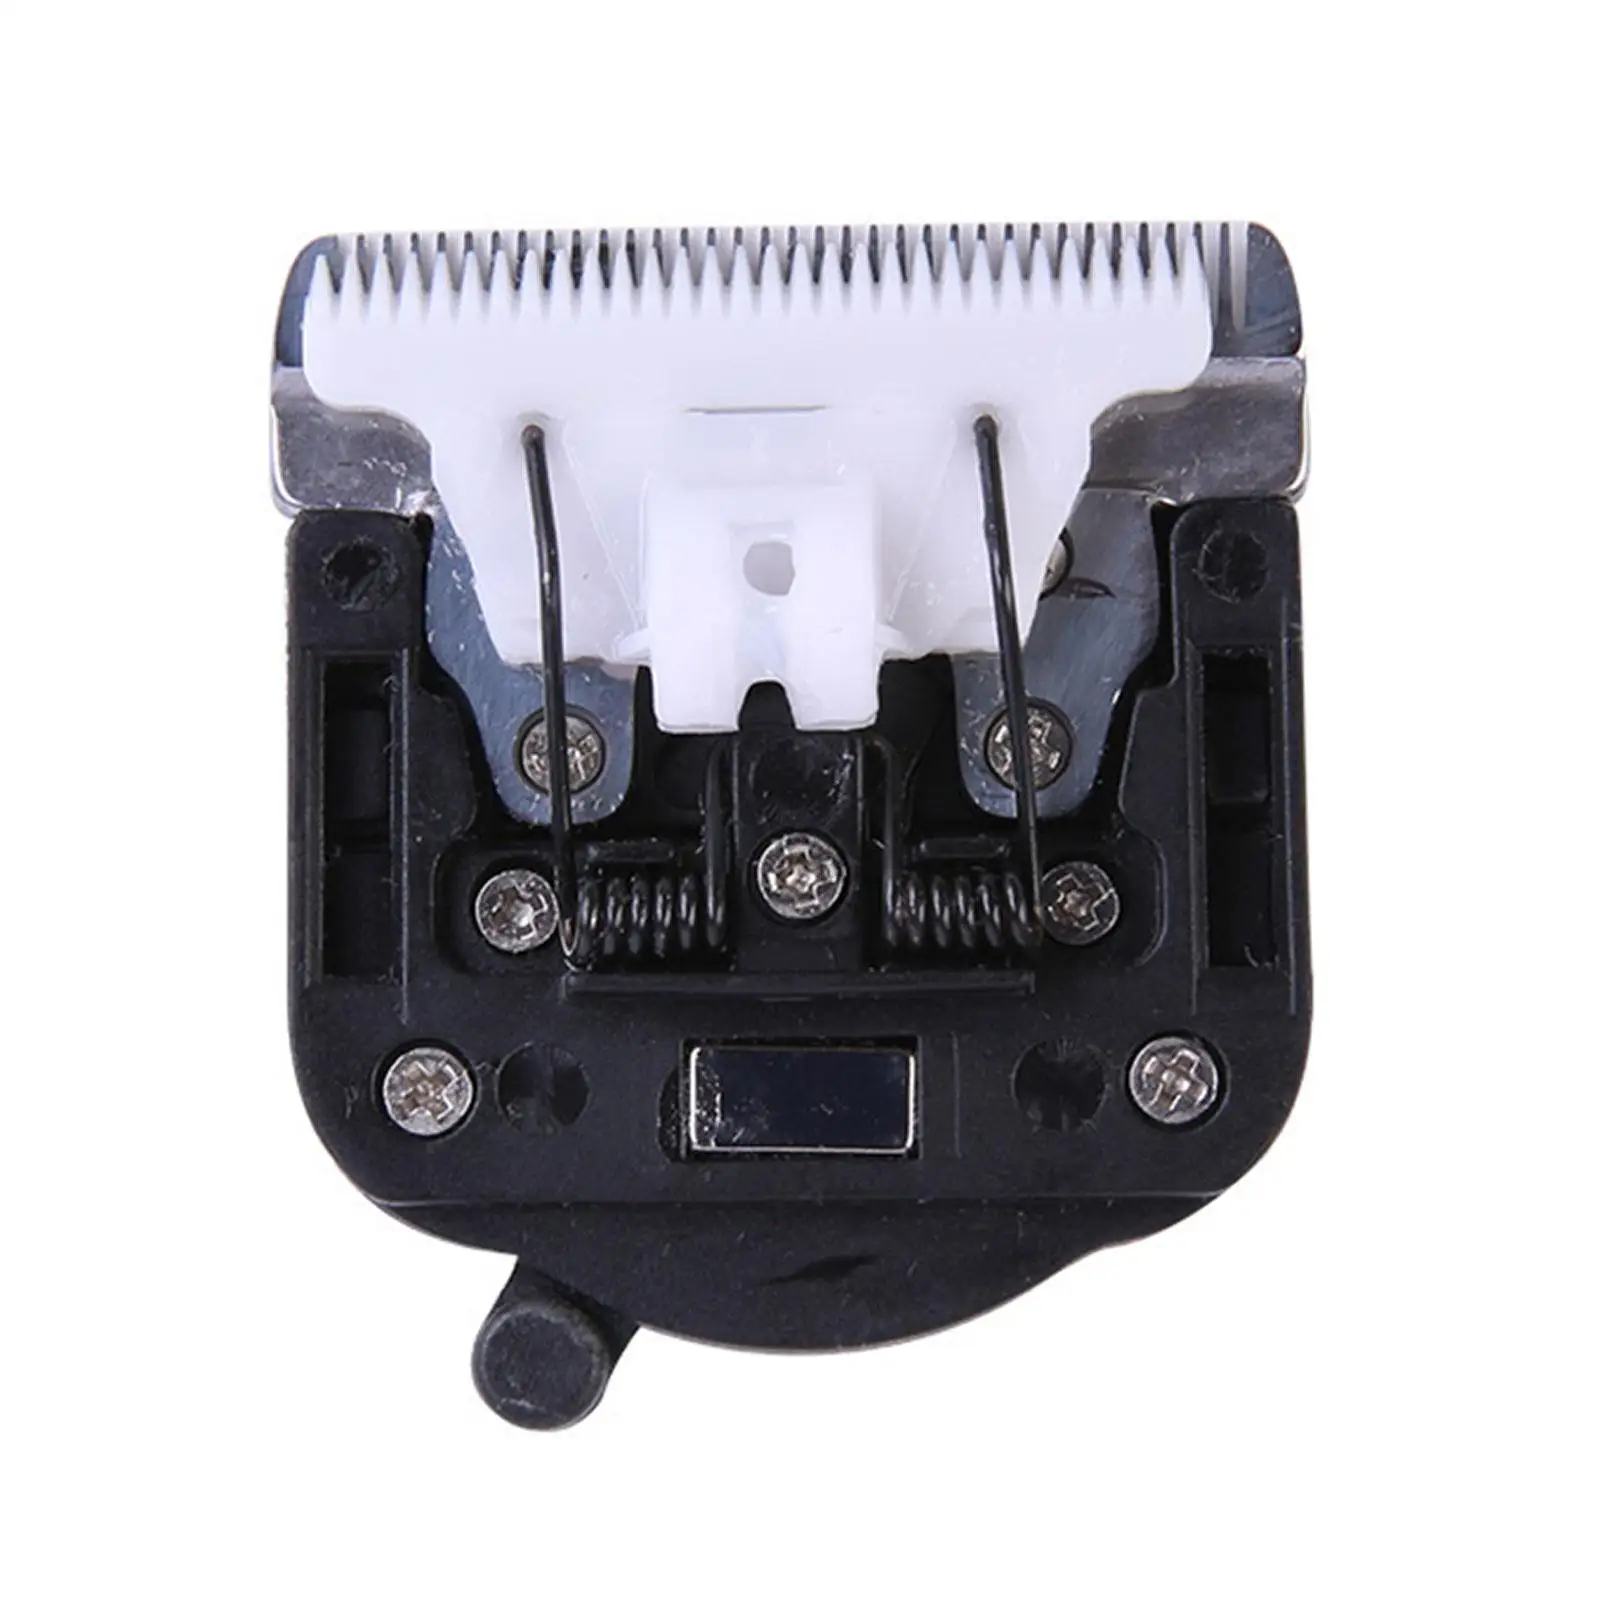 Electric Hair Scissor Head Electric Carpet Trimmer Replacement Head for Cow